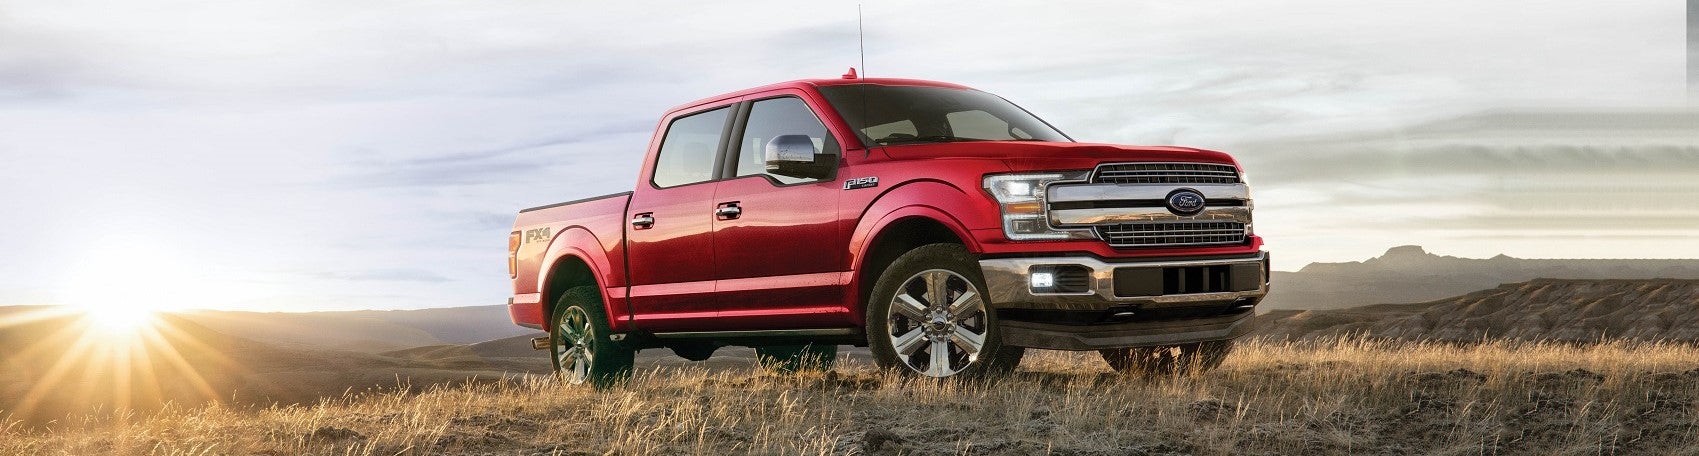 Ford F-150 Lariat Ruby Red